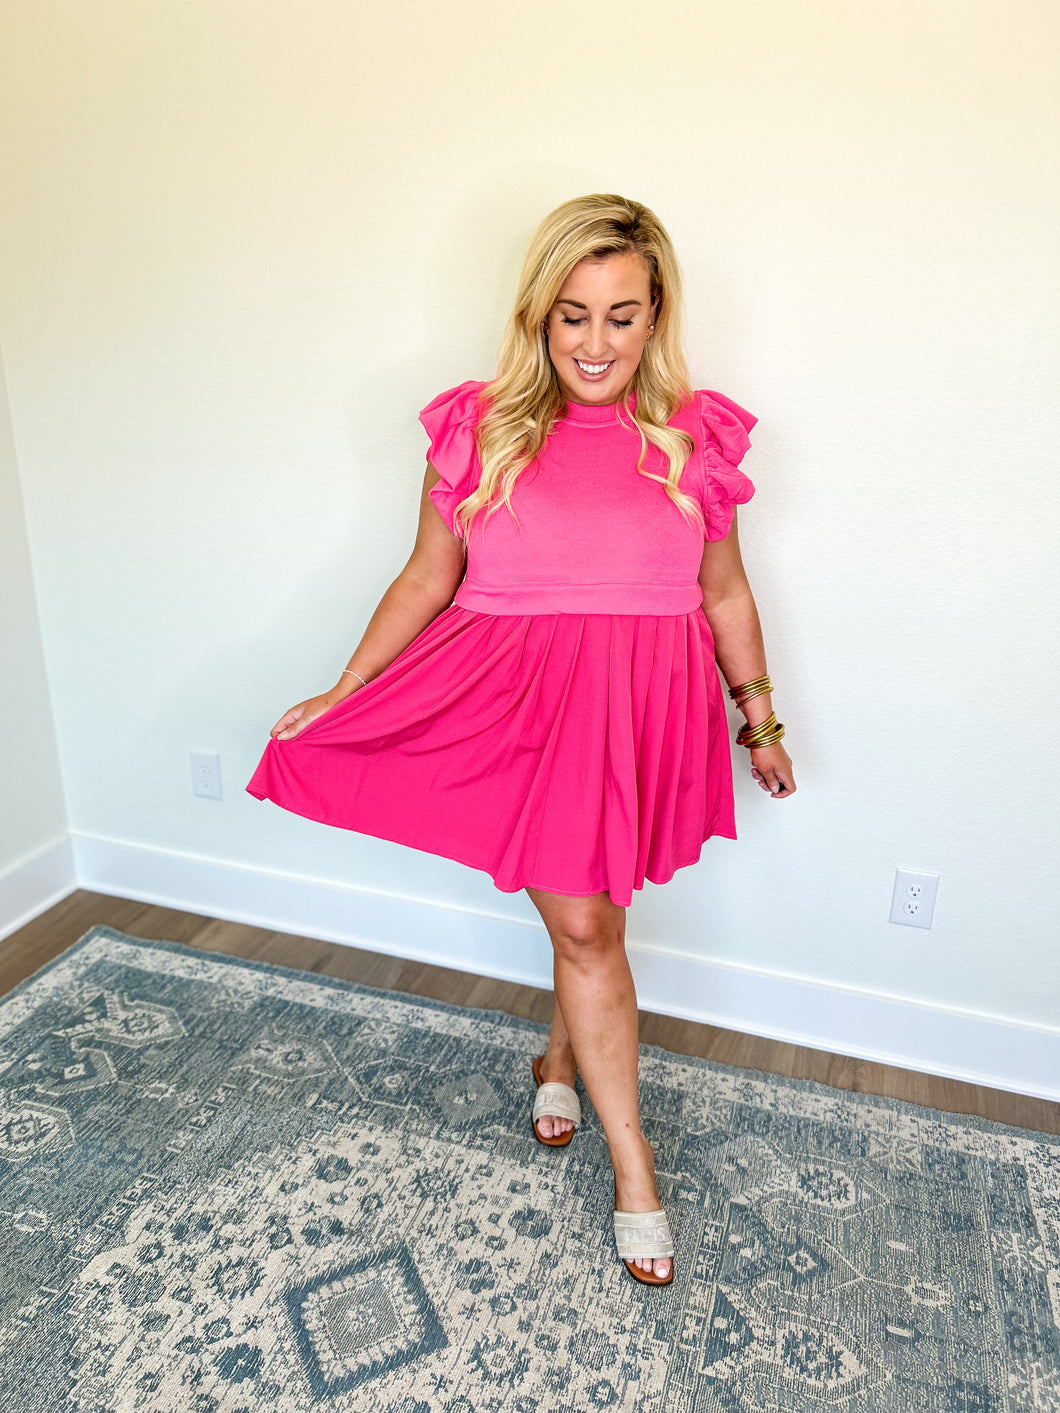 Swing Low Sweet Chariot Dress - Hot Pink